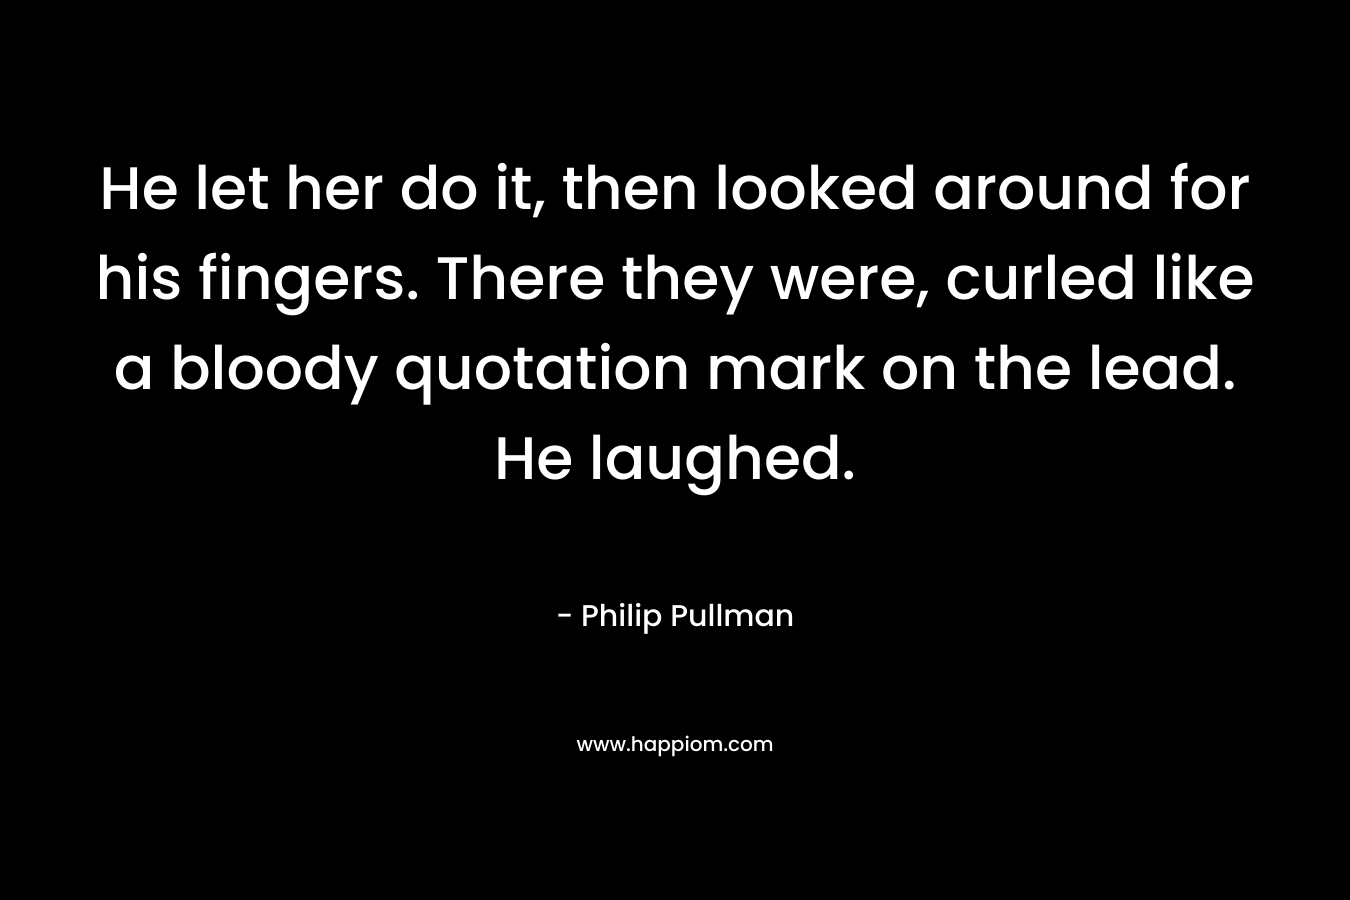 He let her do it, then looked around for his fingers. There they were, curled like a bloody quotation mark on the lead. He laughed. – Philip Pullman